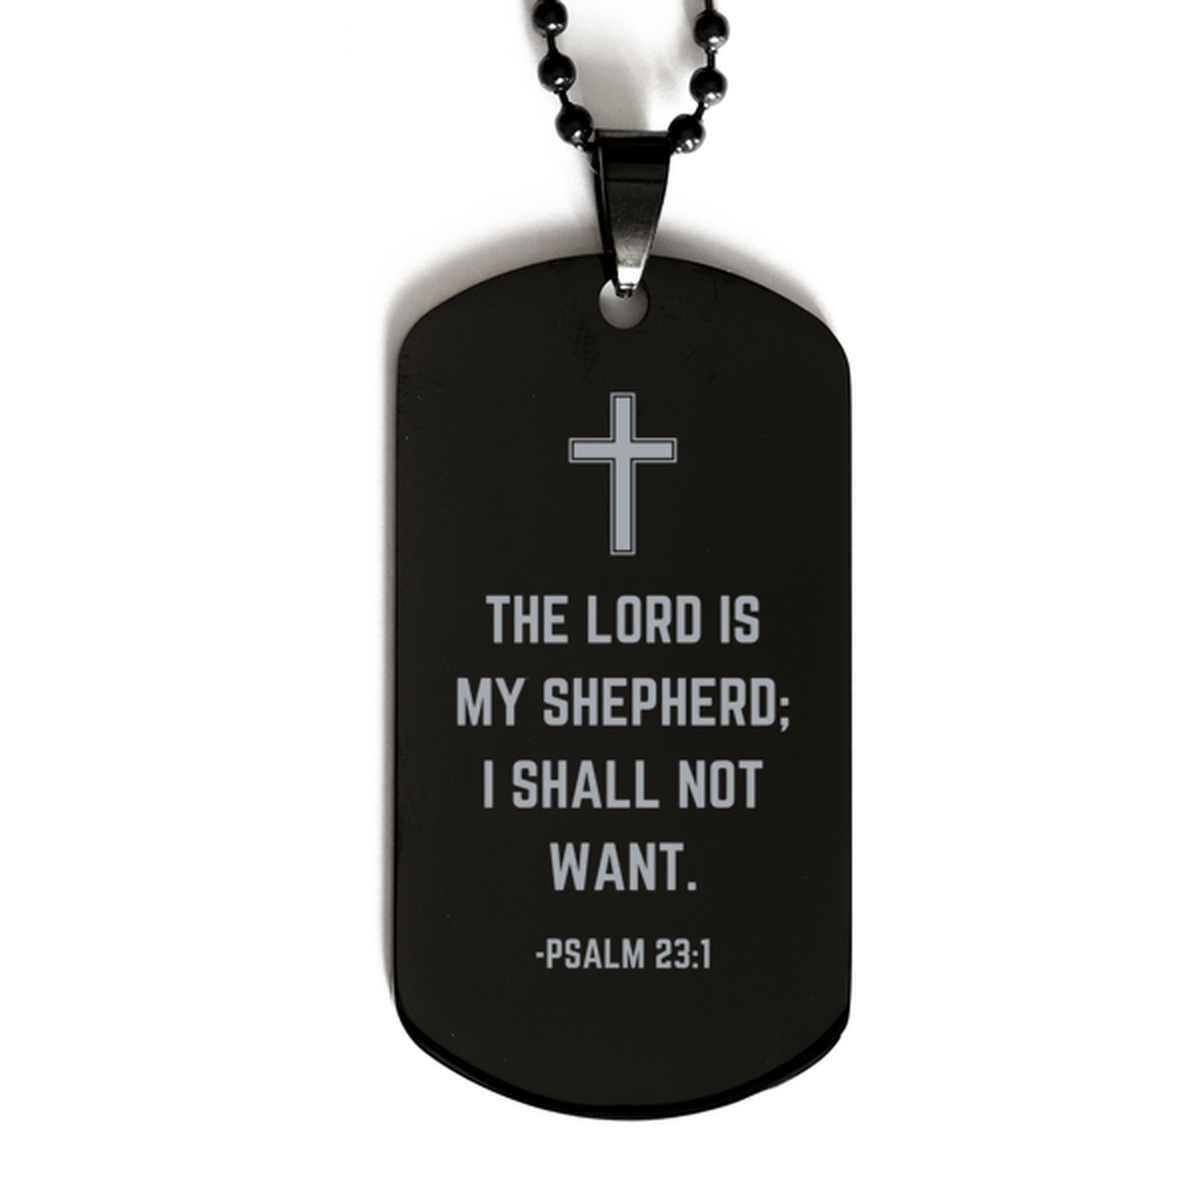 Baptism Gifts For Teenage Boys Girls, Christian Bible Verse Black Dog Tag, The Lord is my shepherd, Confirmation Gifts, Bible Verse Necklace for Son, Godson, Grandson, Nephew